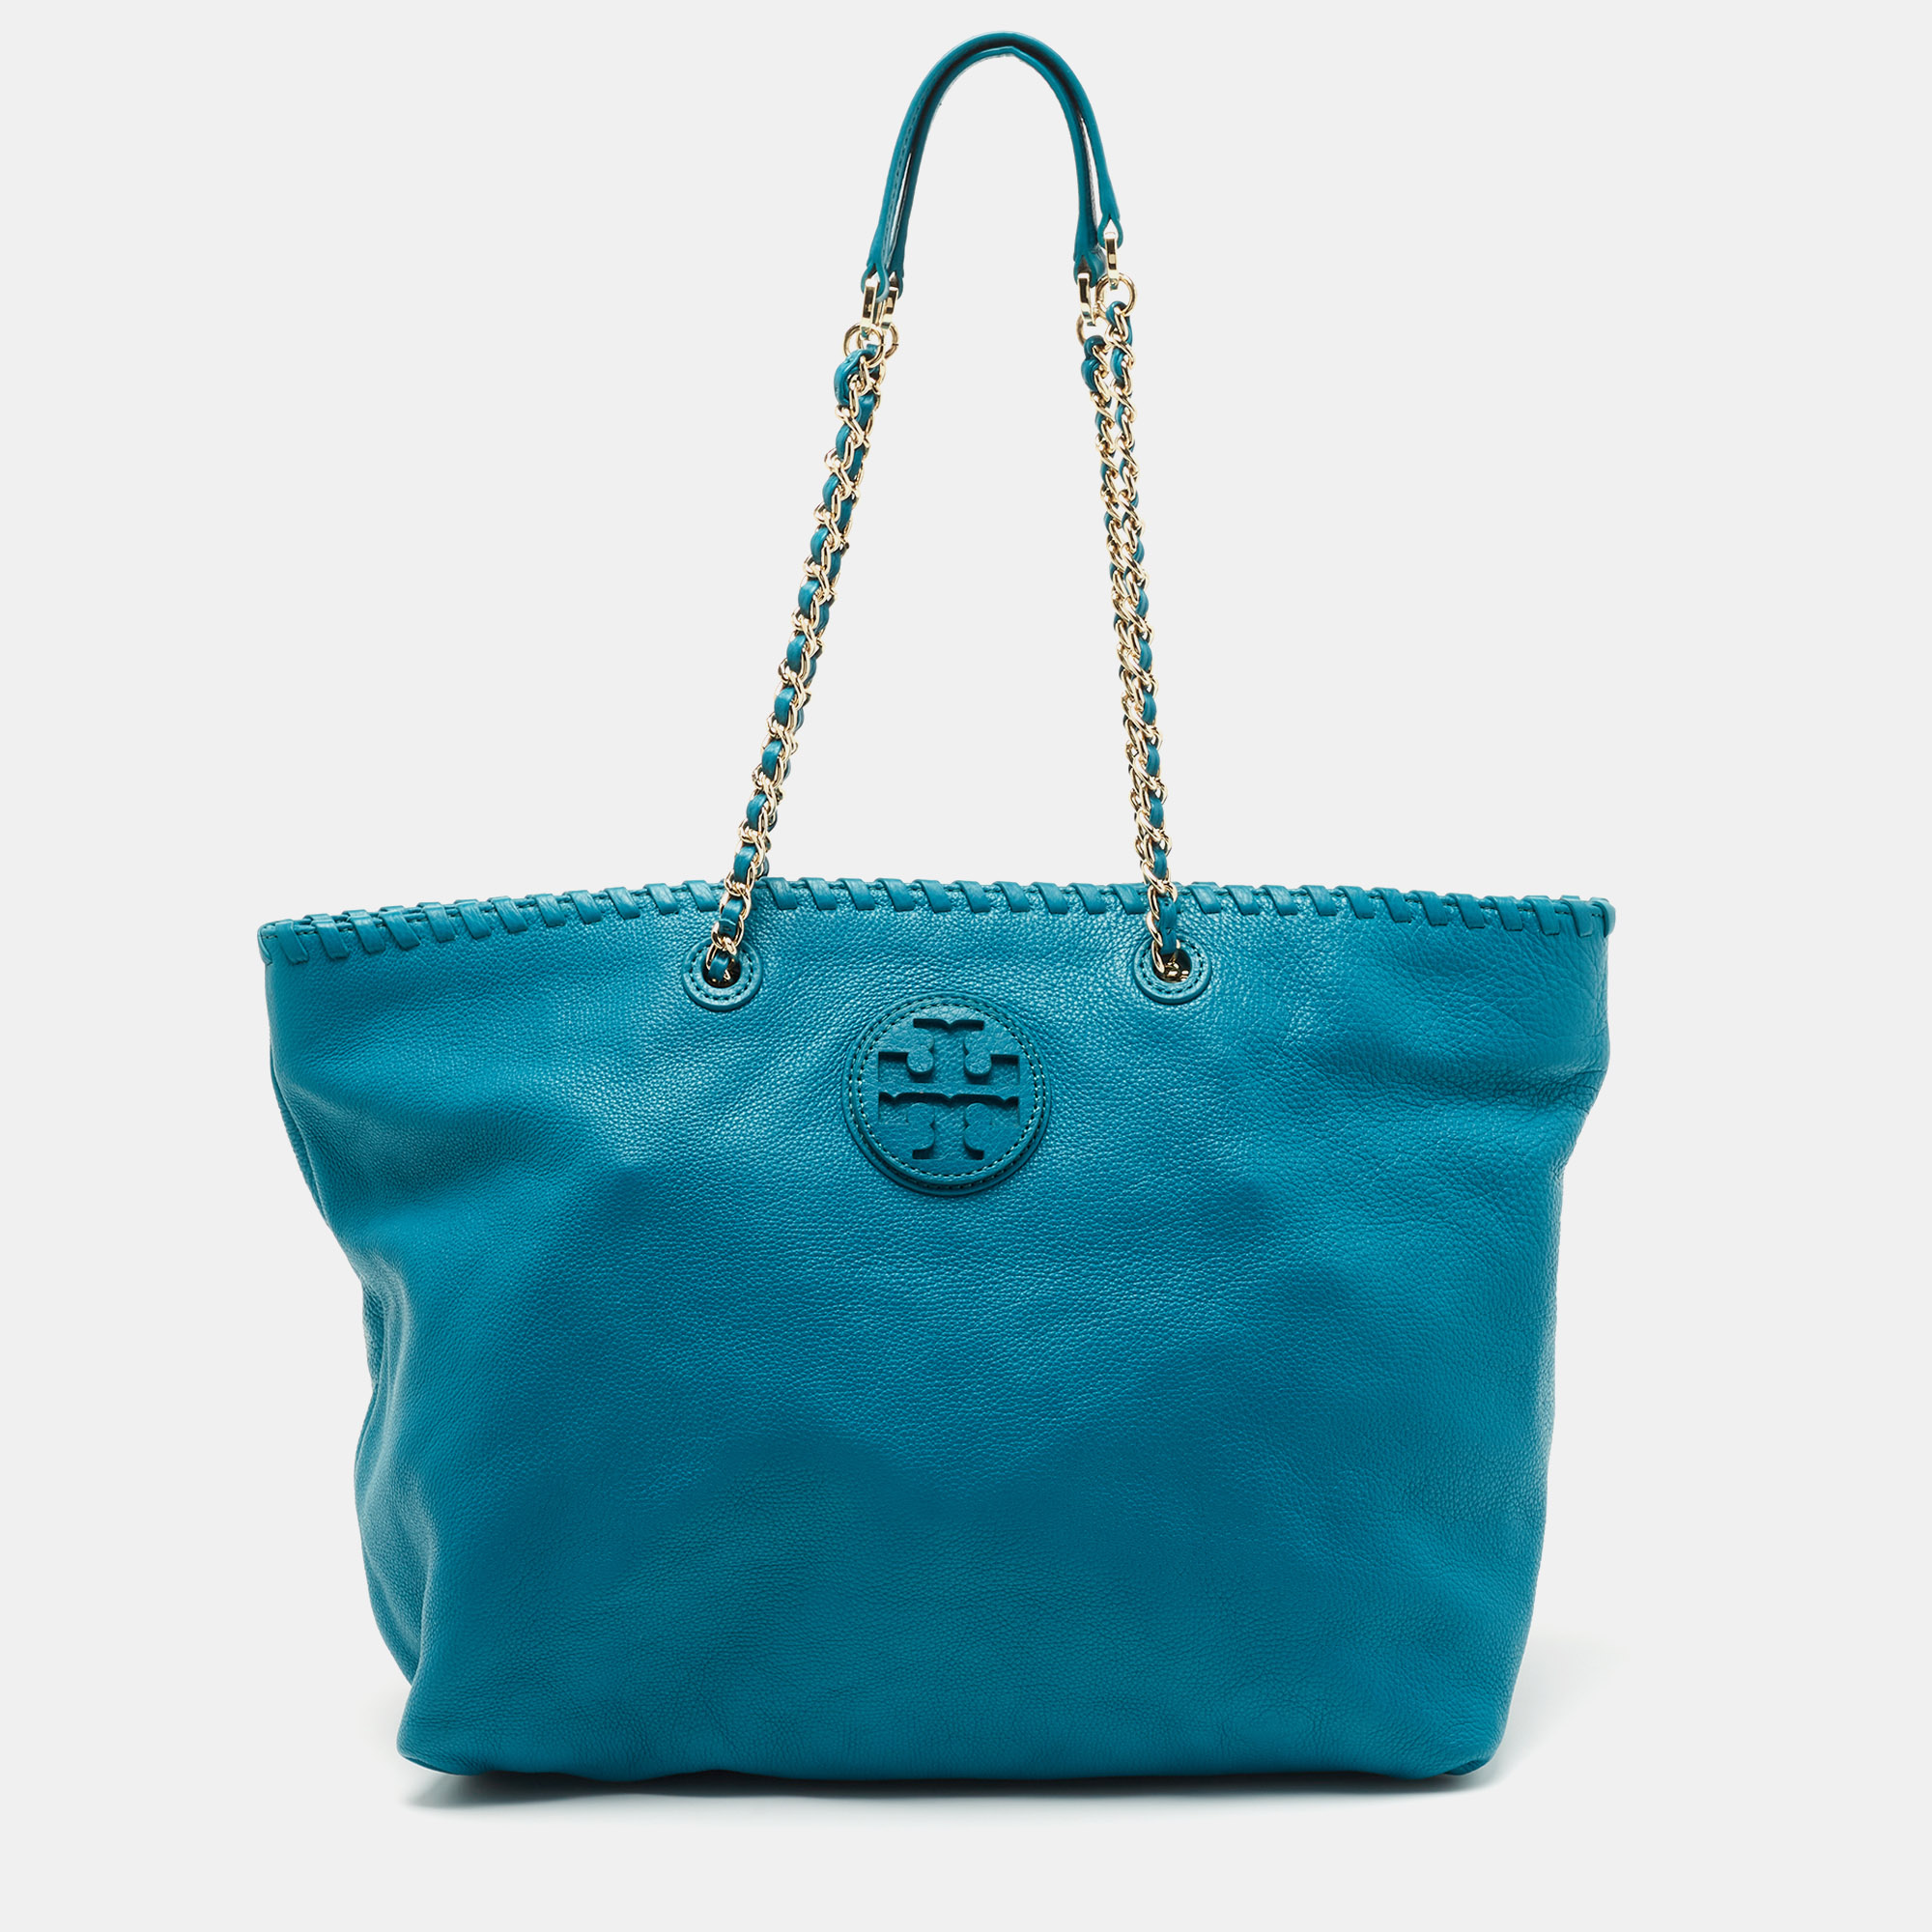 Pre-Owned & Vintage TORY BURCH Bags for Women | ModeSens